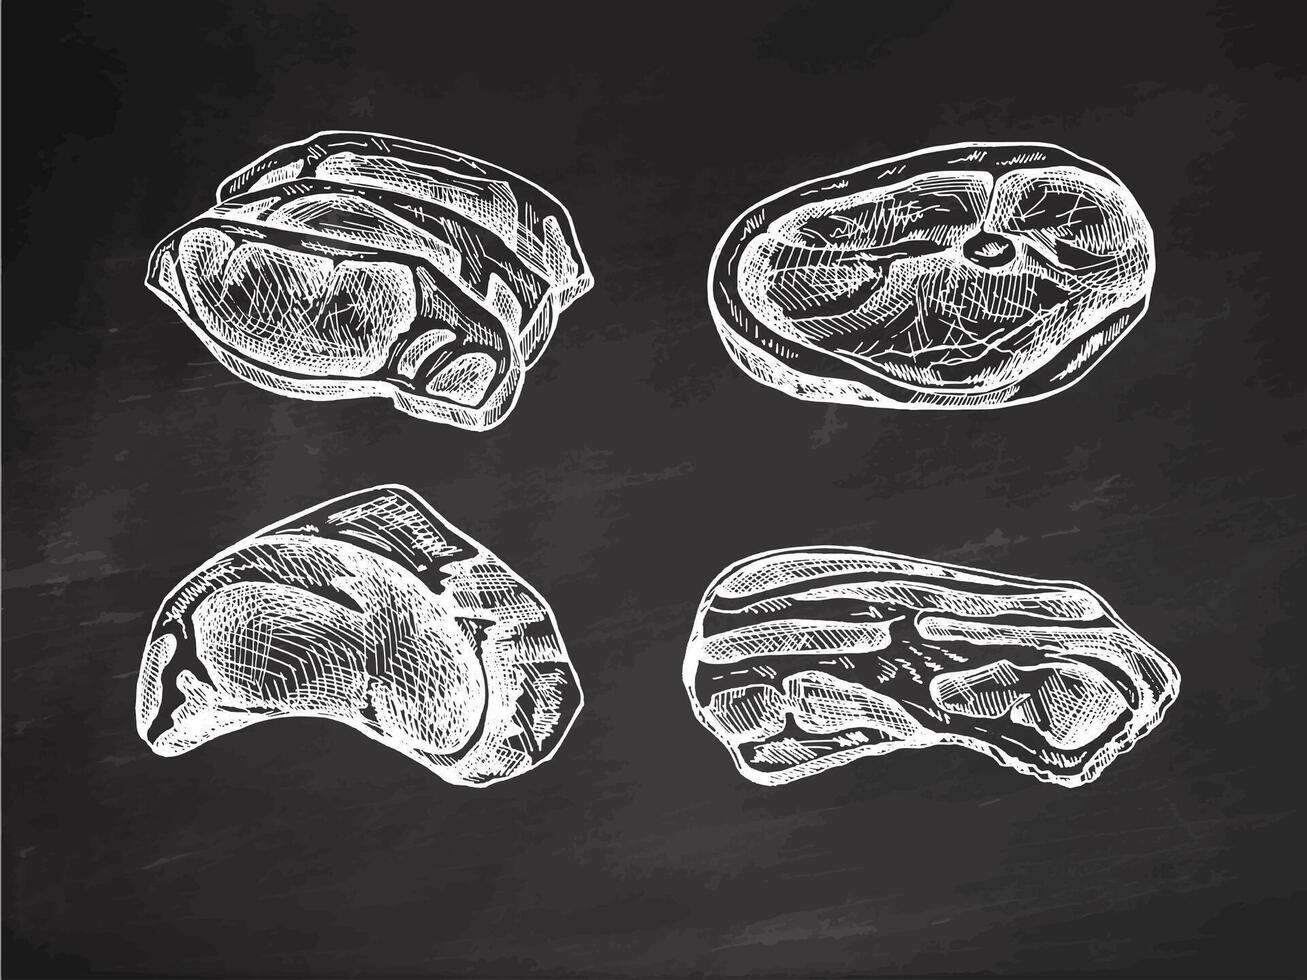 Hand-drawn sketches of pieces of meat, pork or beef steak, chop meat, bacon, piece of meat cuts, vector illustration. Raw meat. Vintage illustration on chalkboard background. Decorations for menu.